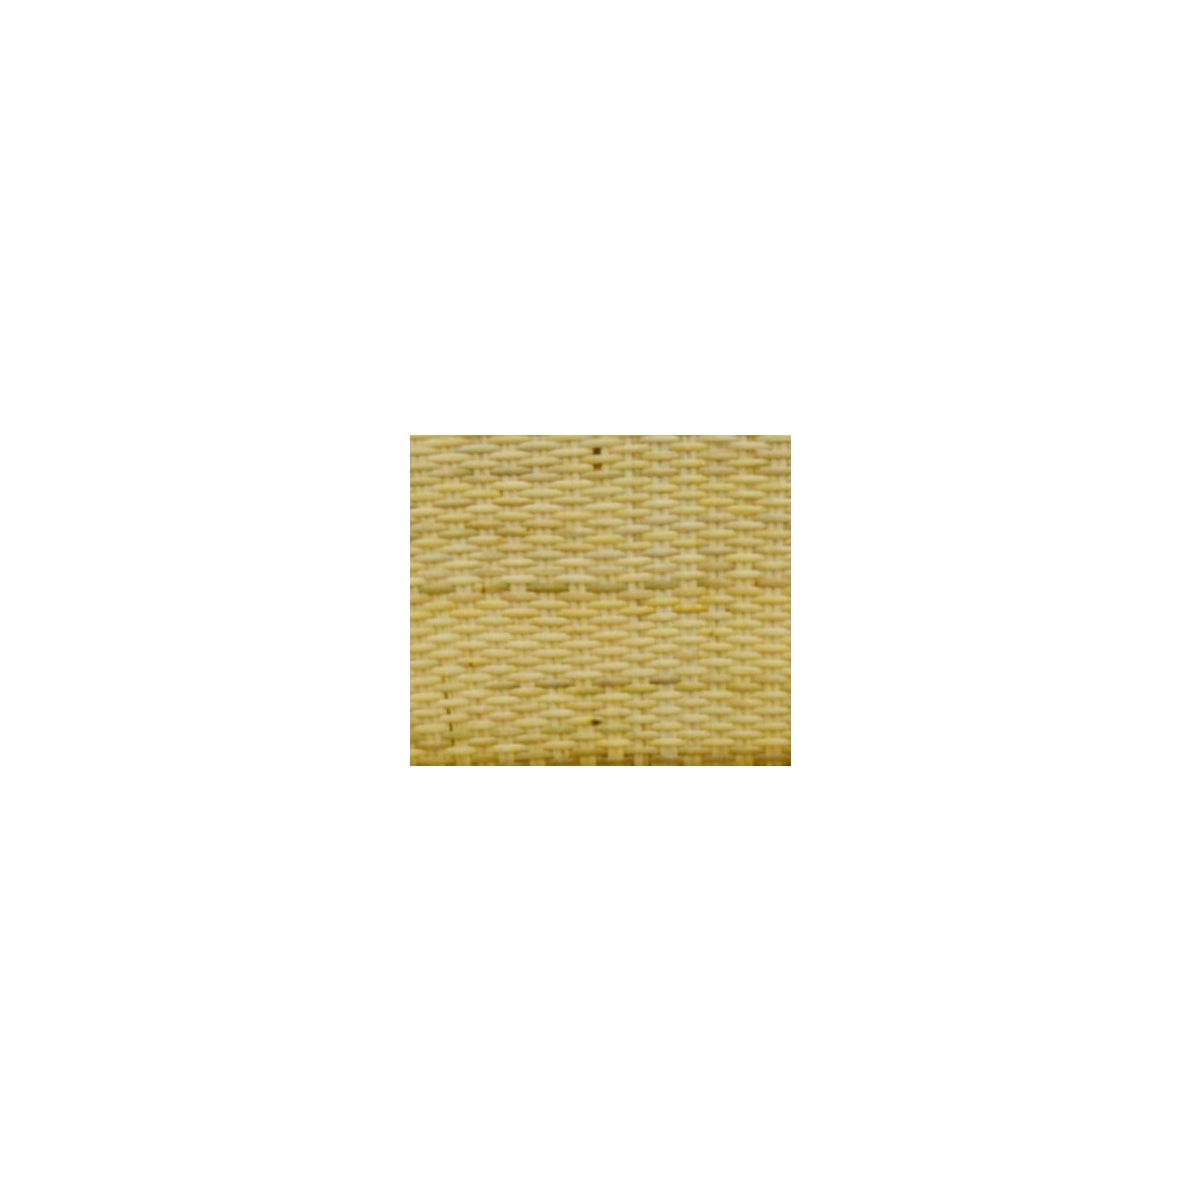 NEW!!  Newport Beach Counter ChairFrame Color - NaturalWeave Color - Natural